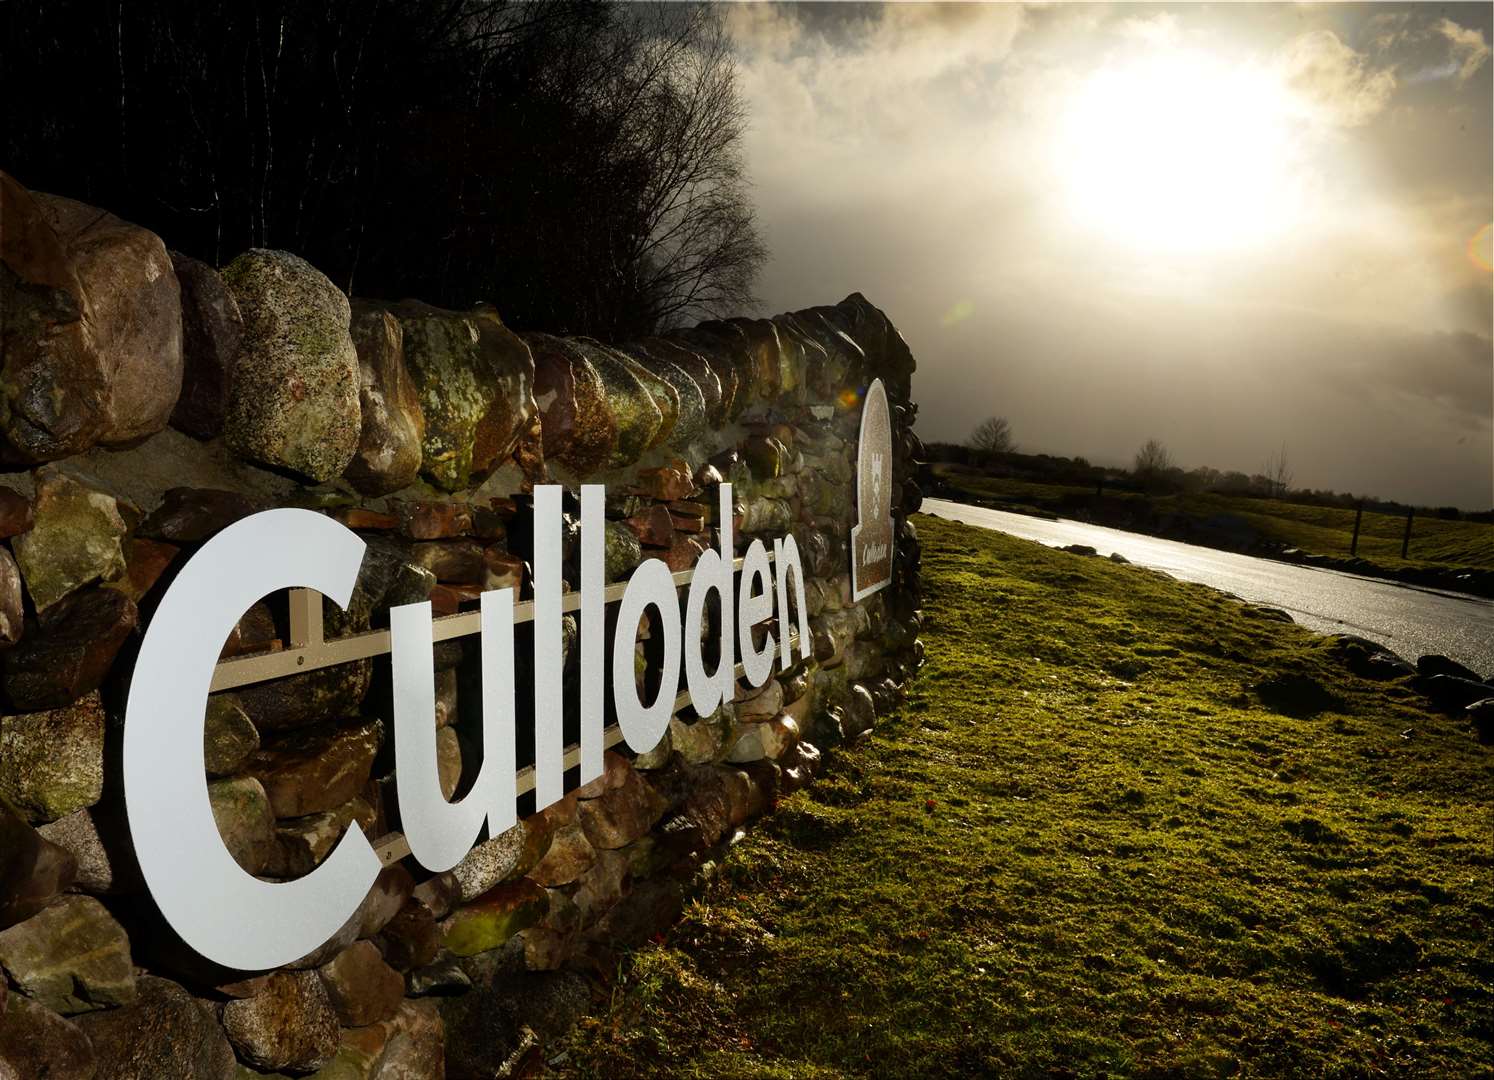 The 276th anniversary of the Battle of Culloden will be commemorated this weekend.